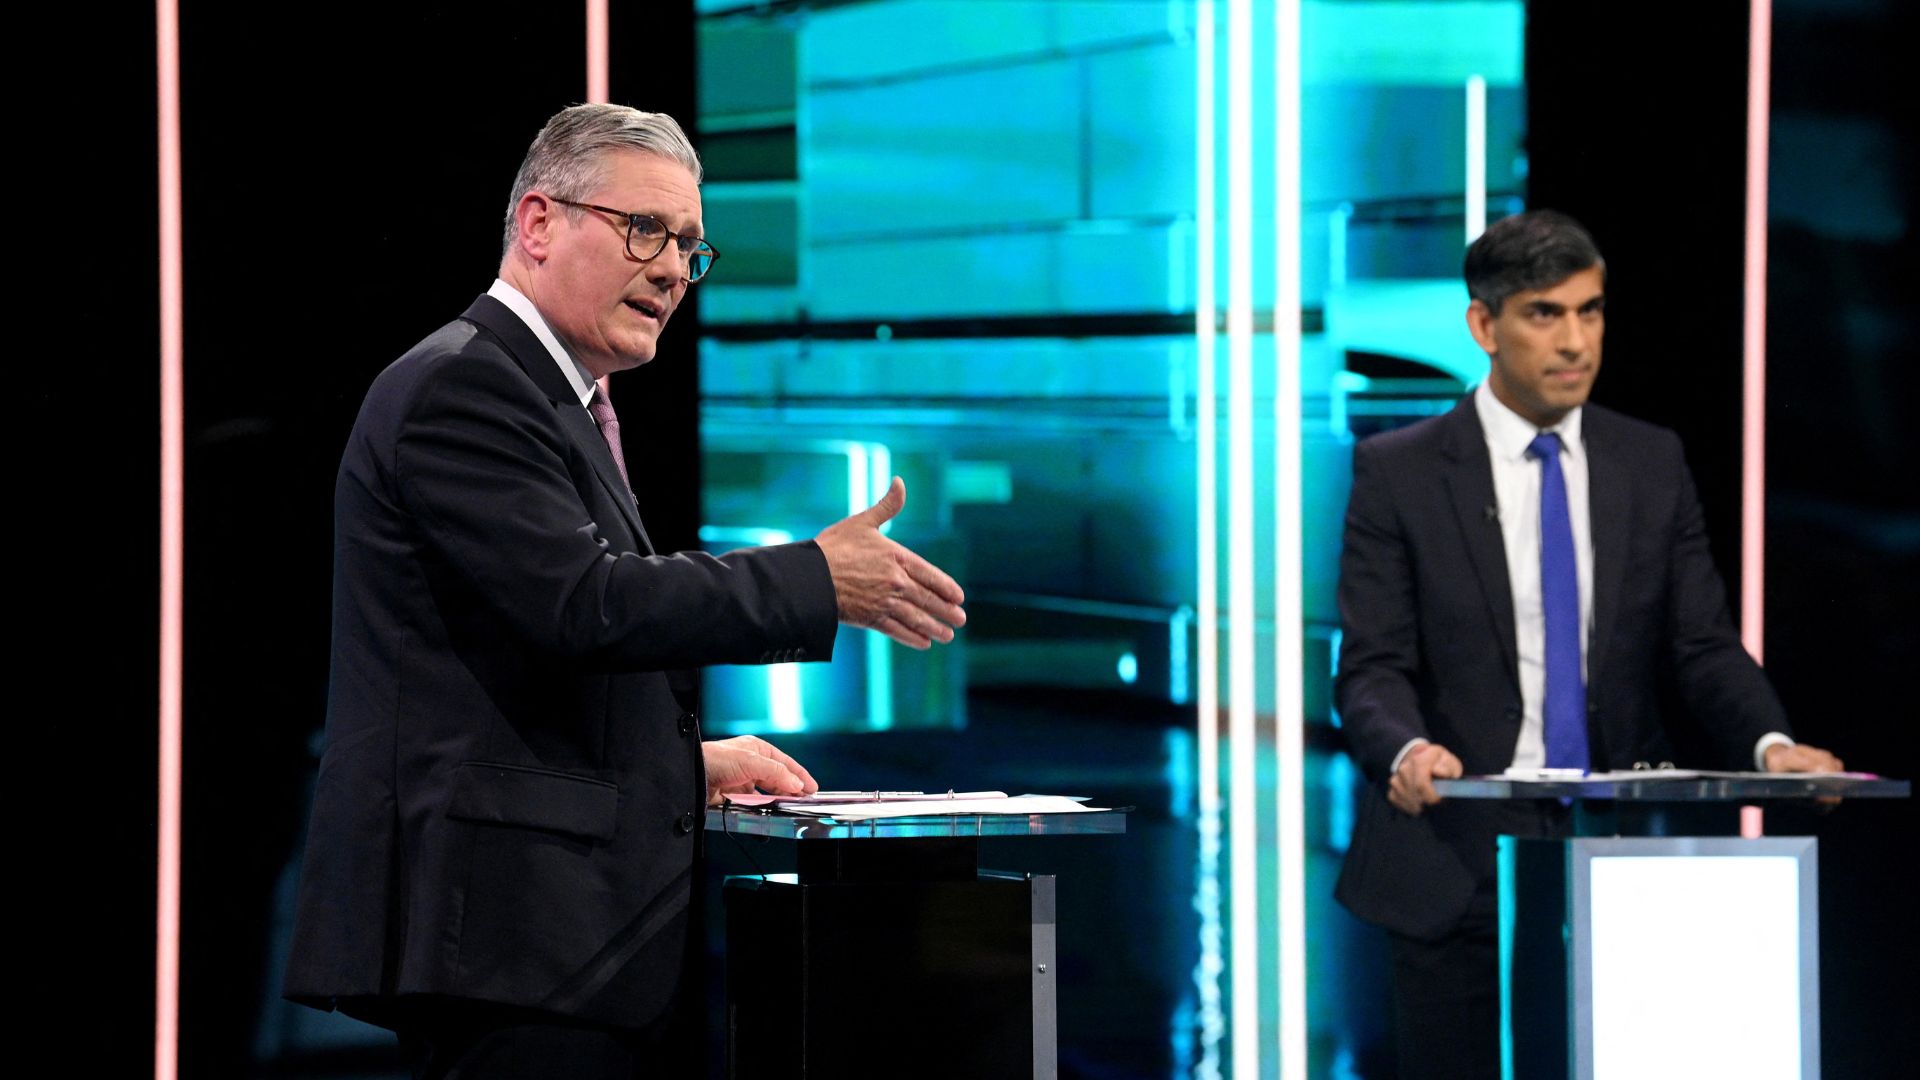 Britain's Labour Party leader Keir Starmer and Conservative Party counterpart Rishi Sunak, during a head-to-head TV debate. /Jonathan Hordle/ITV/Handout via Reuters